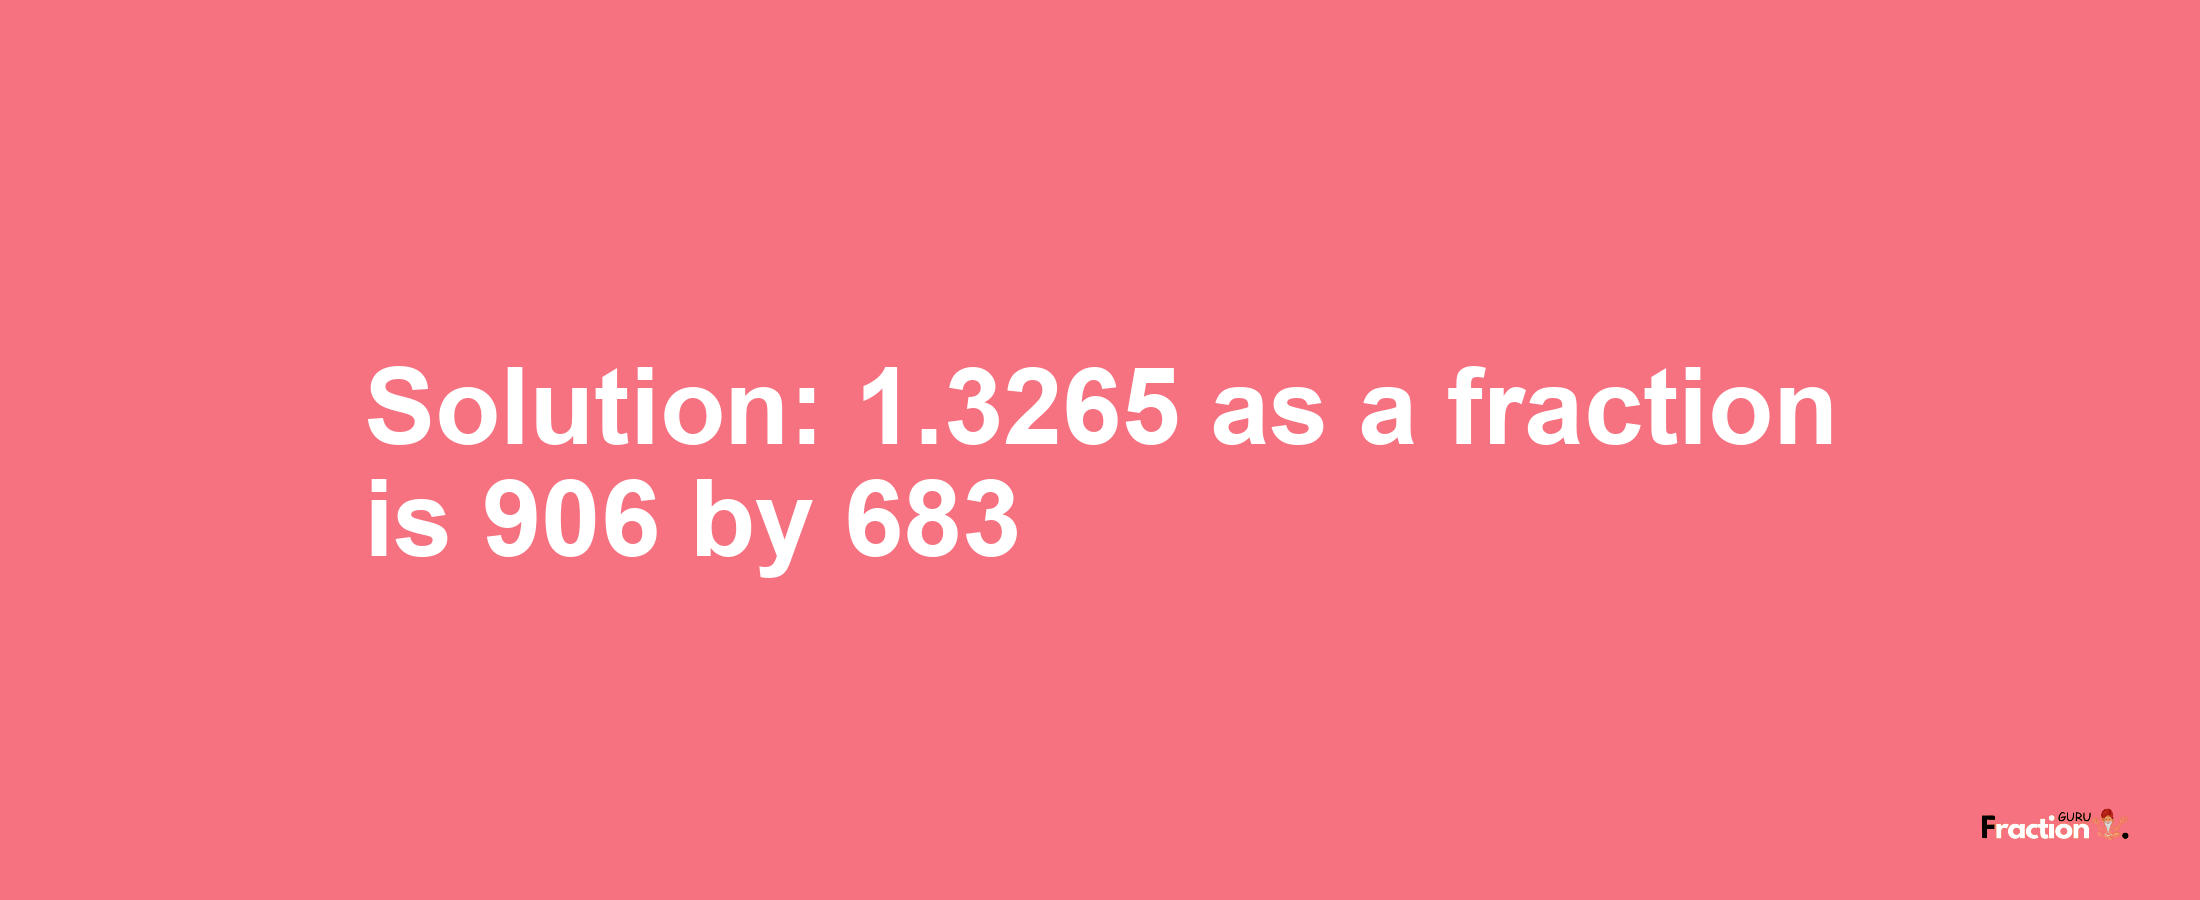 Solution:1.3265 as a fraction is 906/683